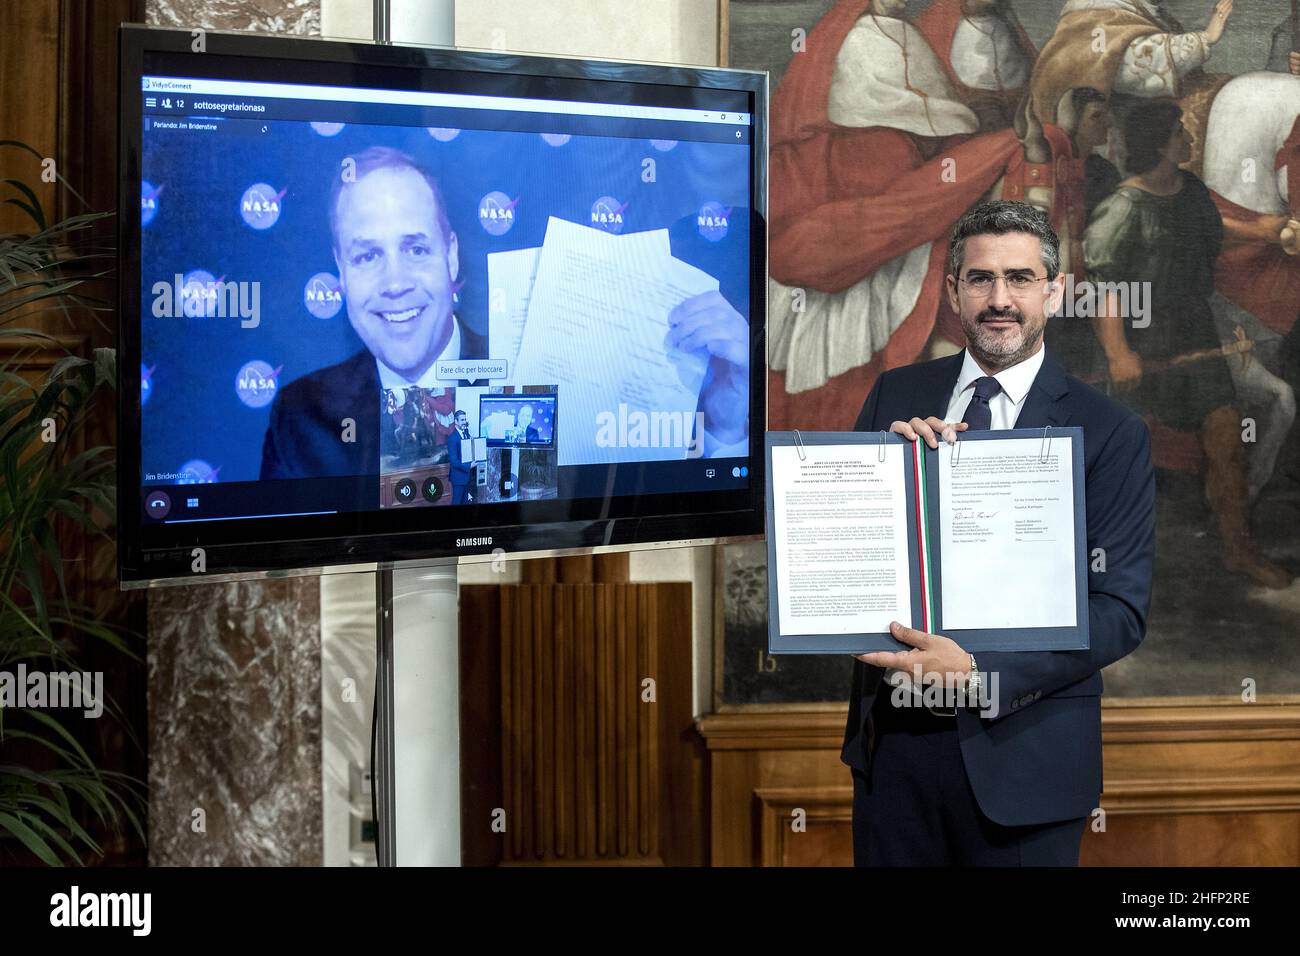 Roberto Monaldo / LaPresse 25-09-2020 Rome (Italy) Chigi palace - Signing of the cooperation agreement with the United States on space activities In the pic Jim Bridenstine (Nasa), Riccardo Fraccaro Stock Photo